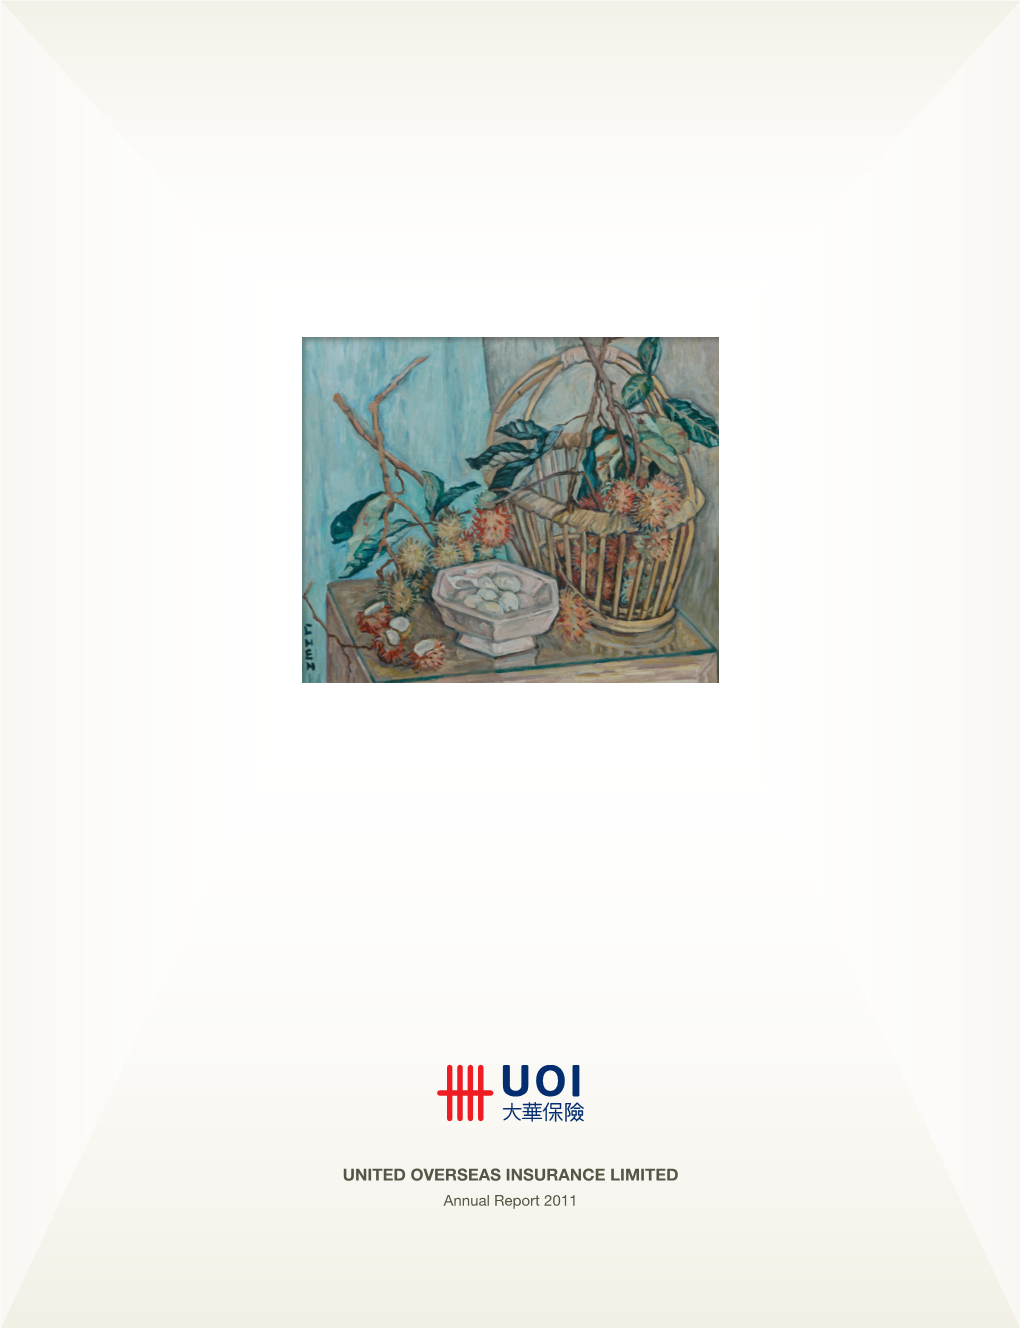 UNITED OVERSEAS INSURANCE LIMITED Annual Report 2011